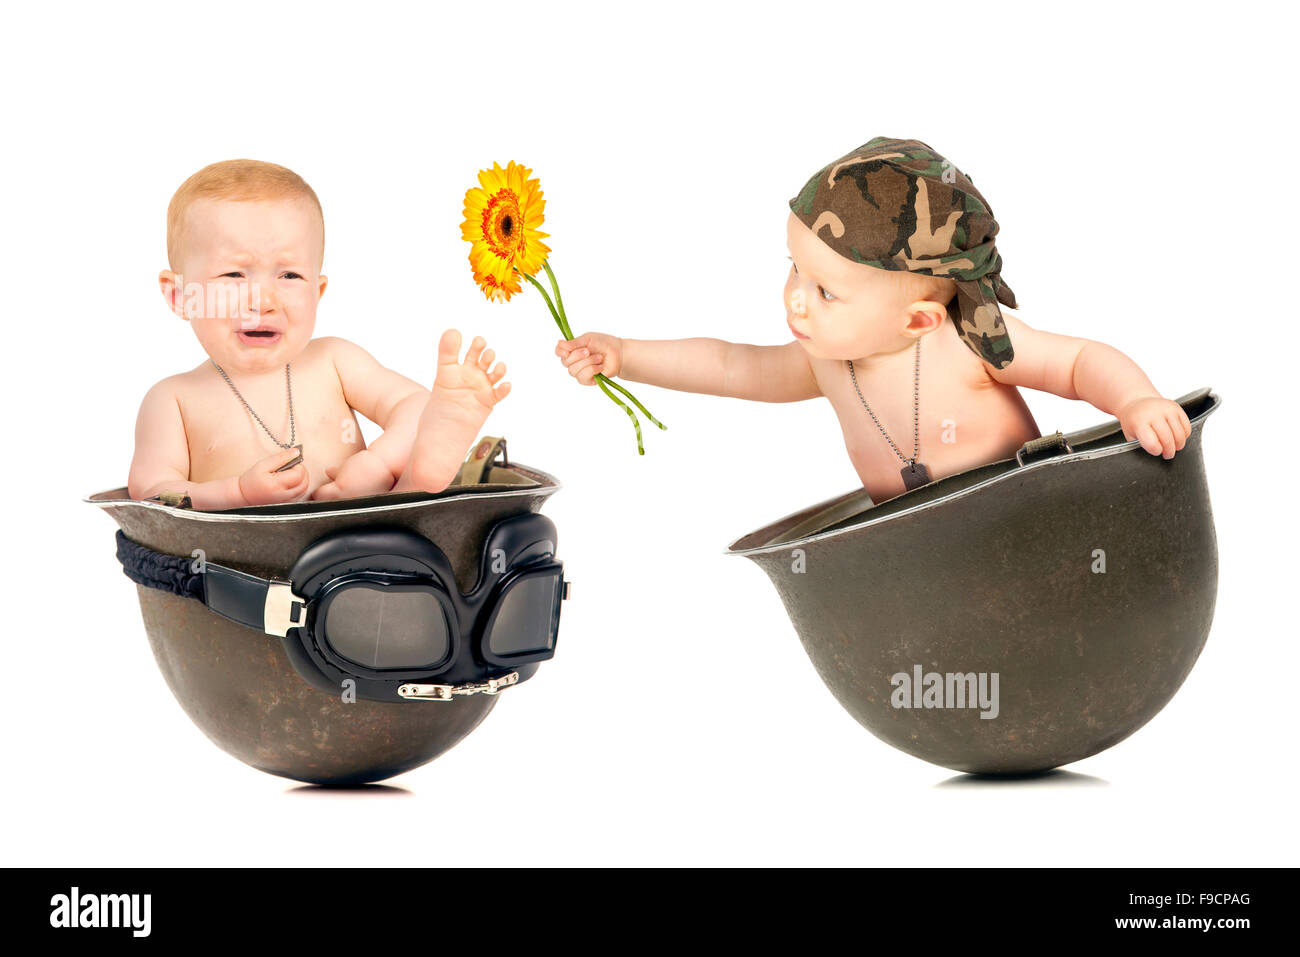 Cute baby girl duplicated inside an old military helmet Stock Photo